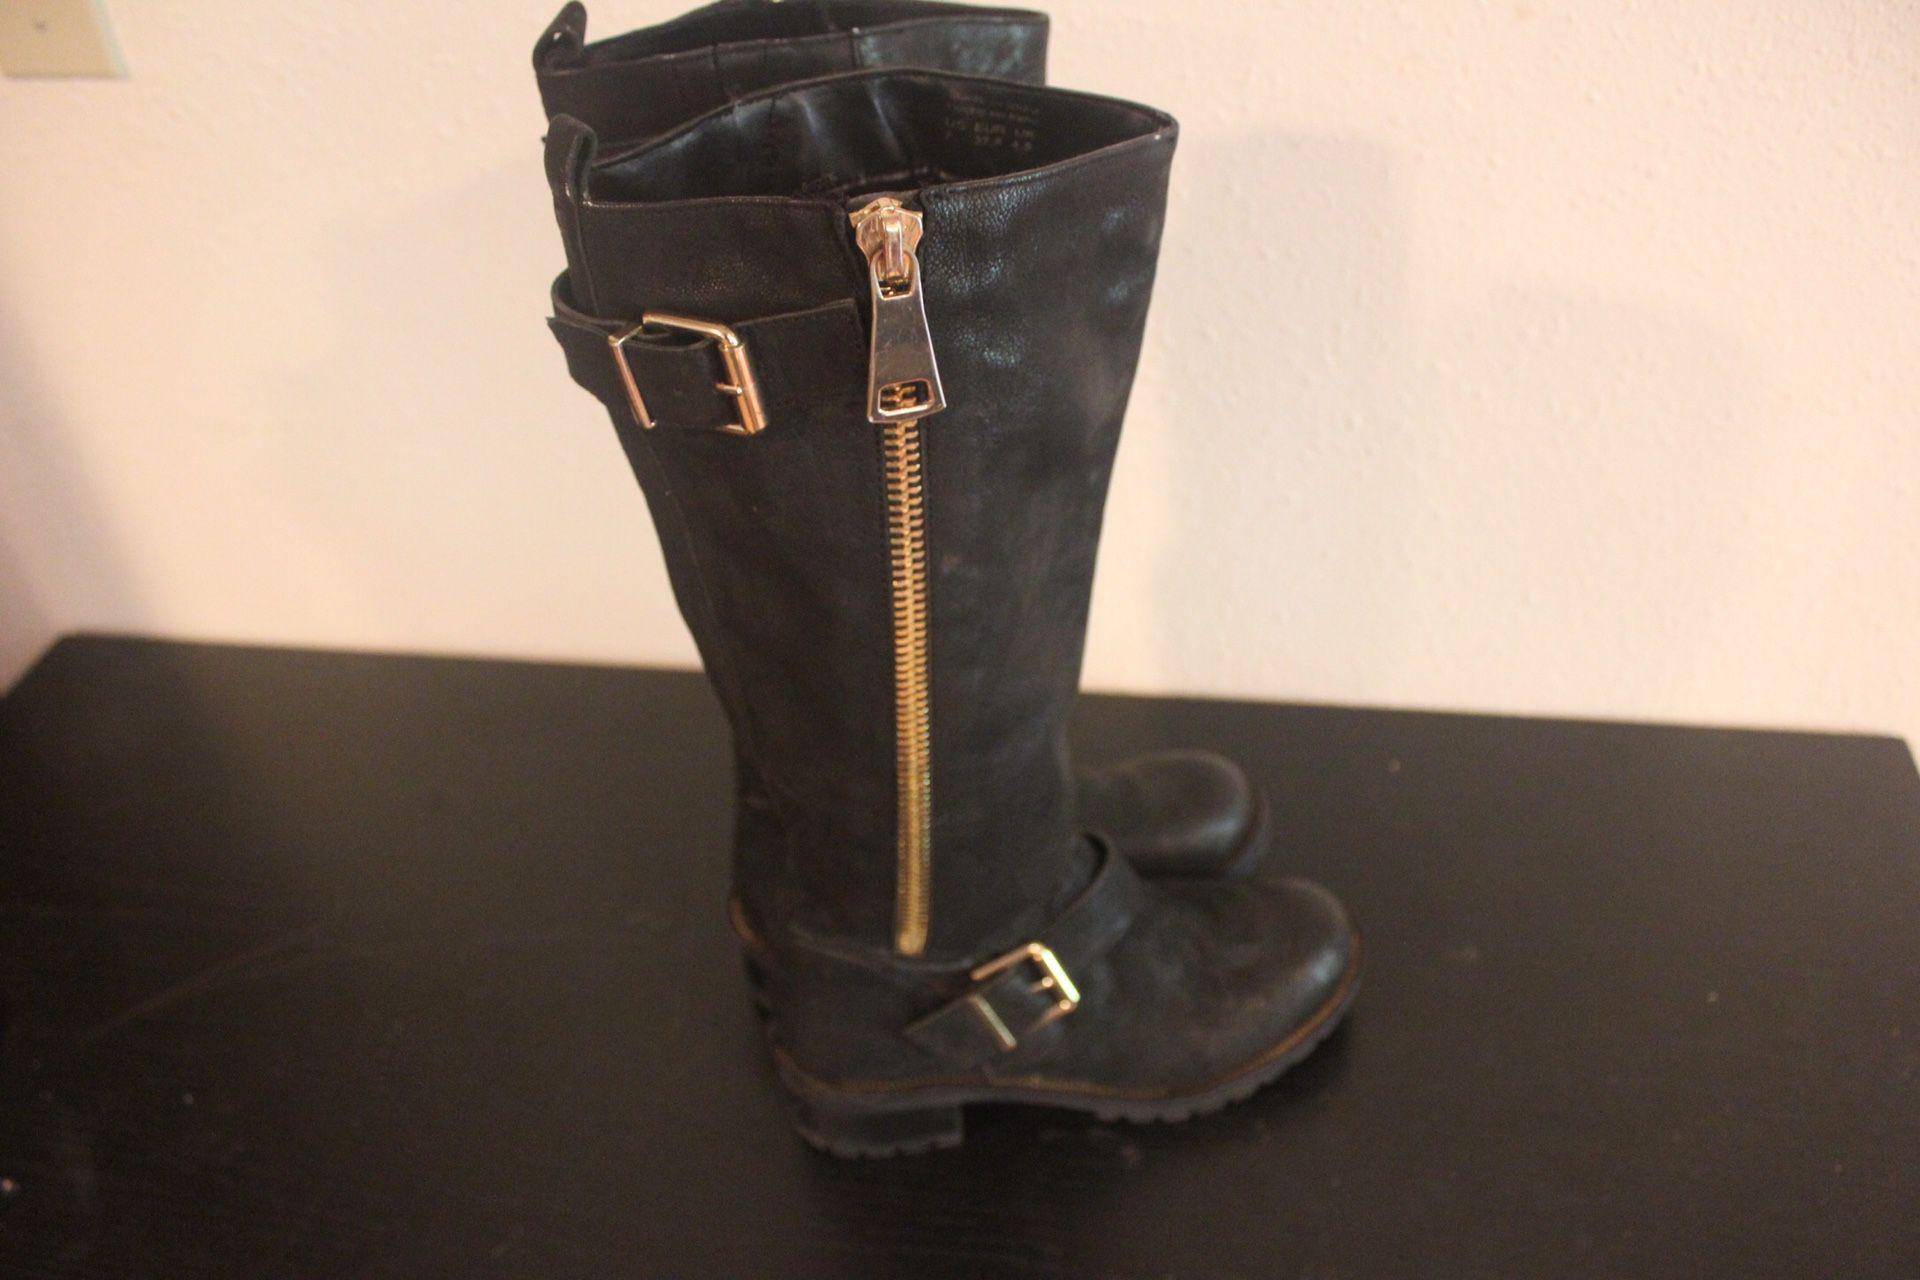 Women’s also boots size 7